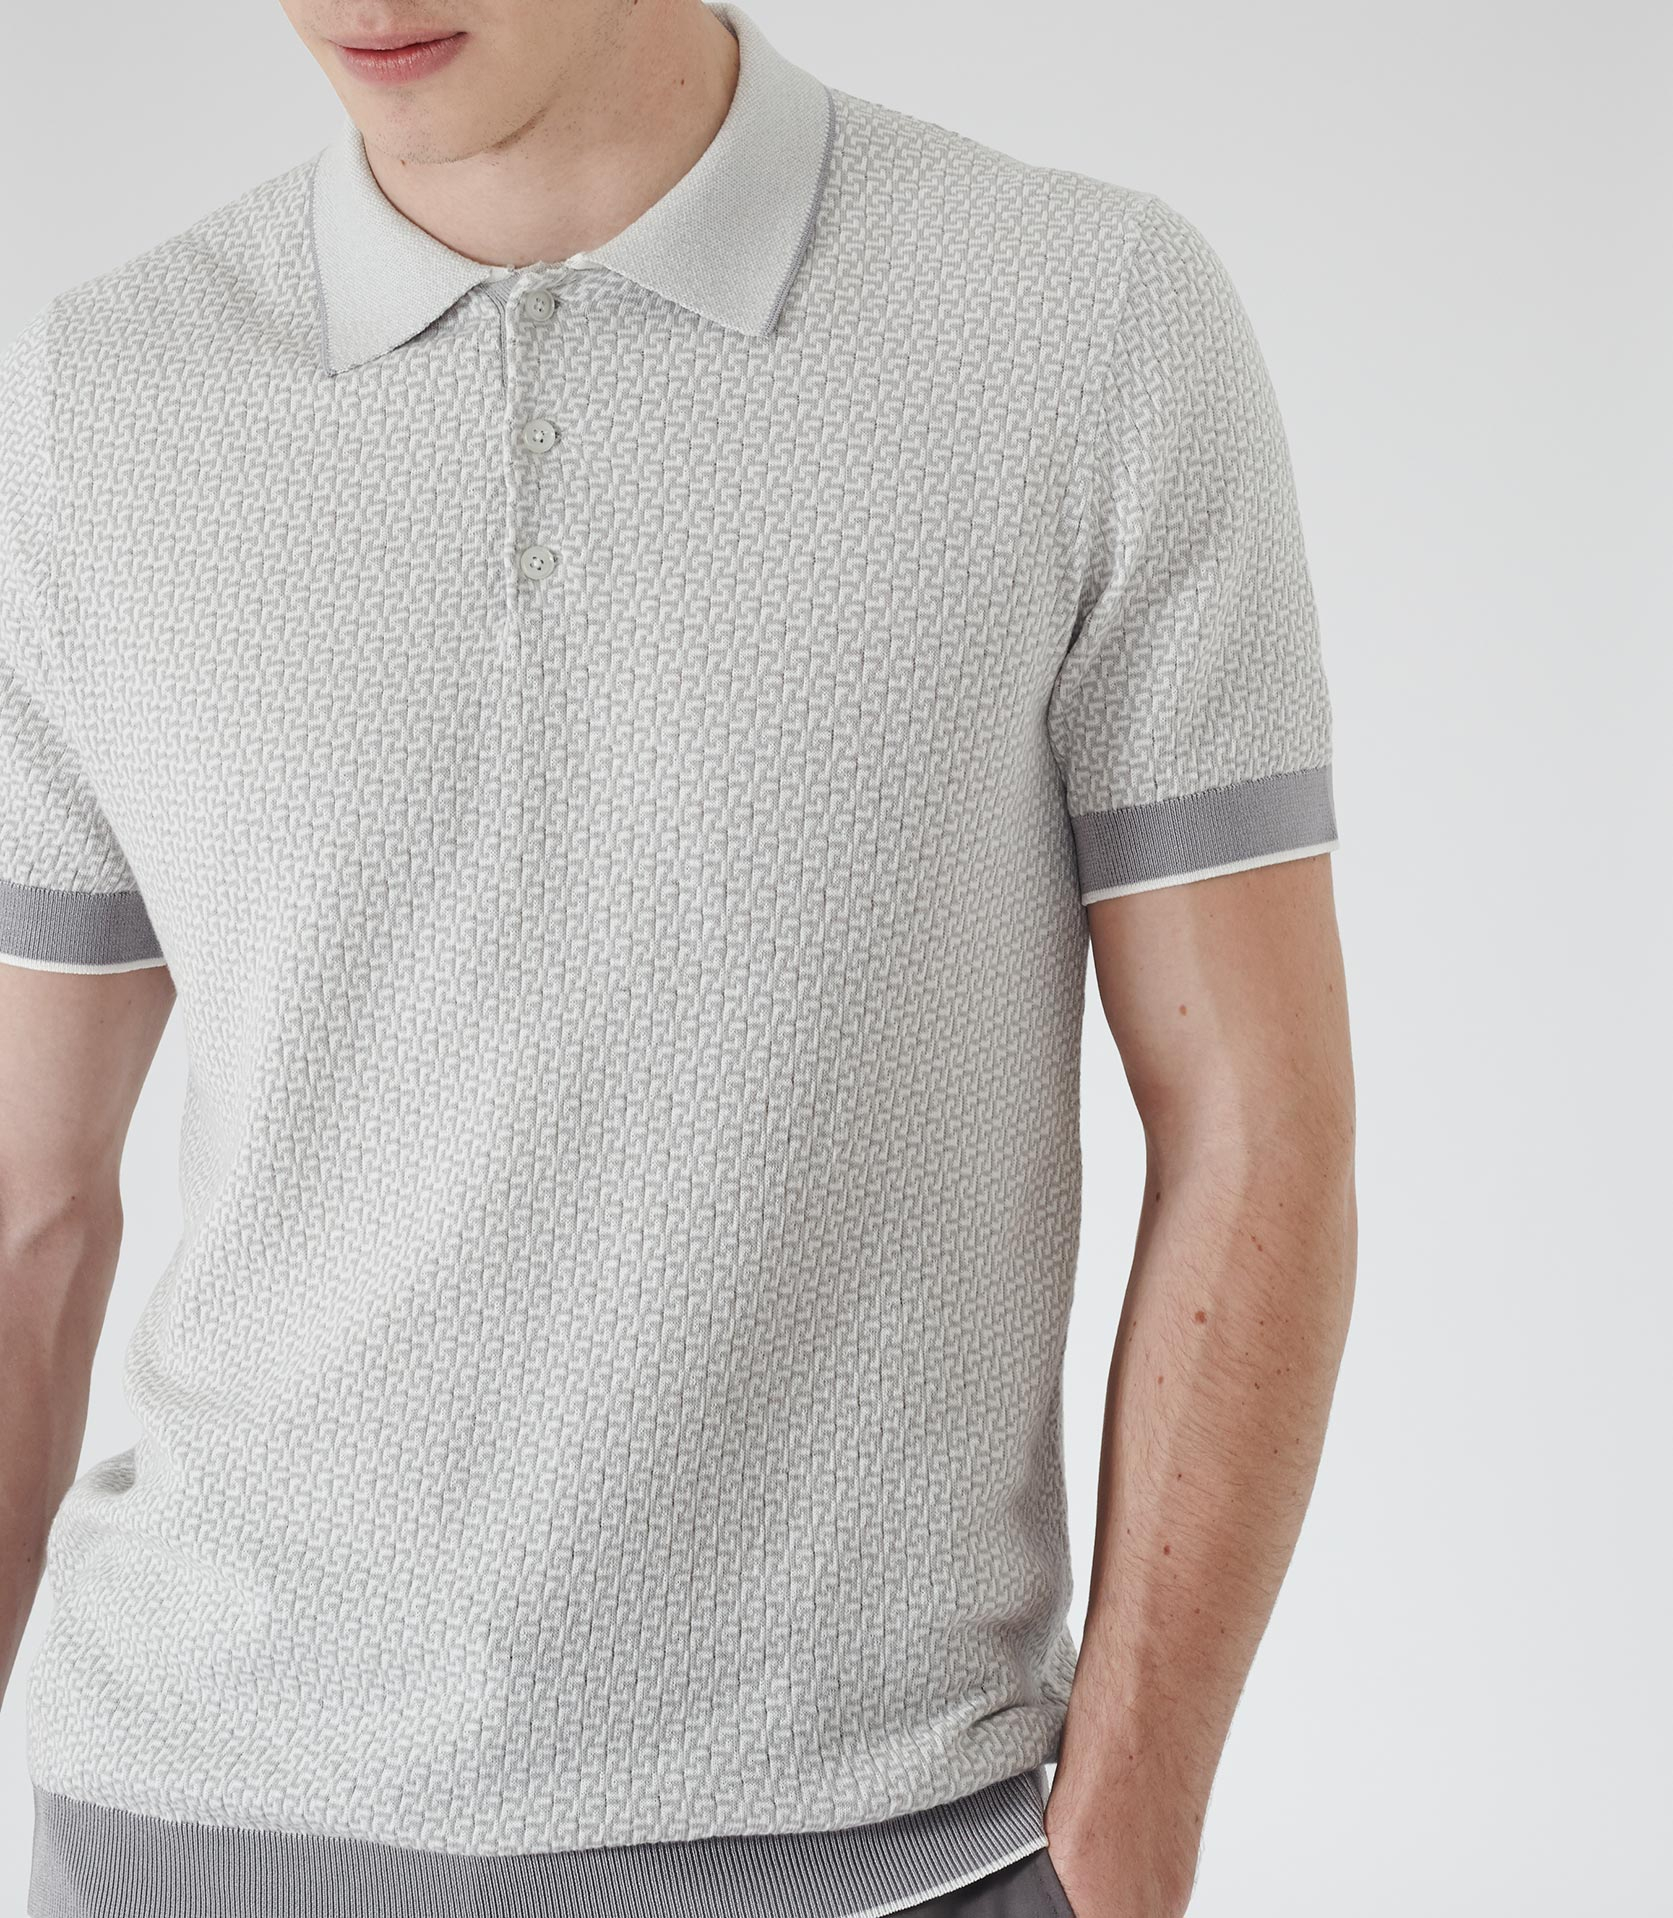 Reiss Folio Geometric Knitted Polo Shirt in Grey (Gray) for Men - Lyst